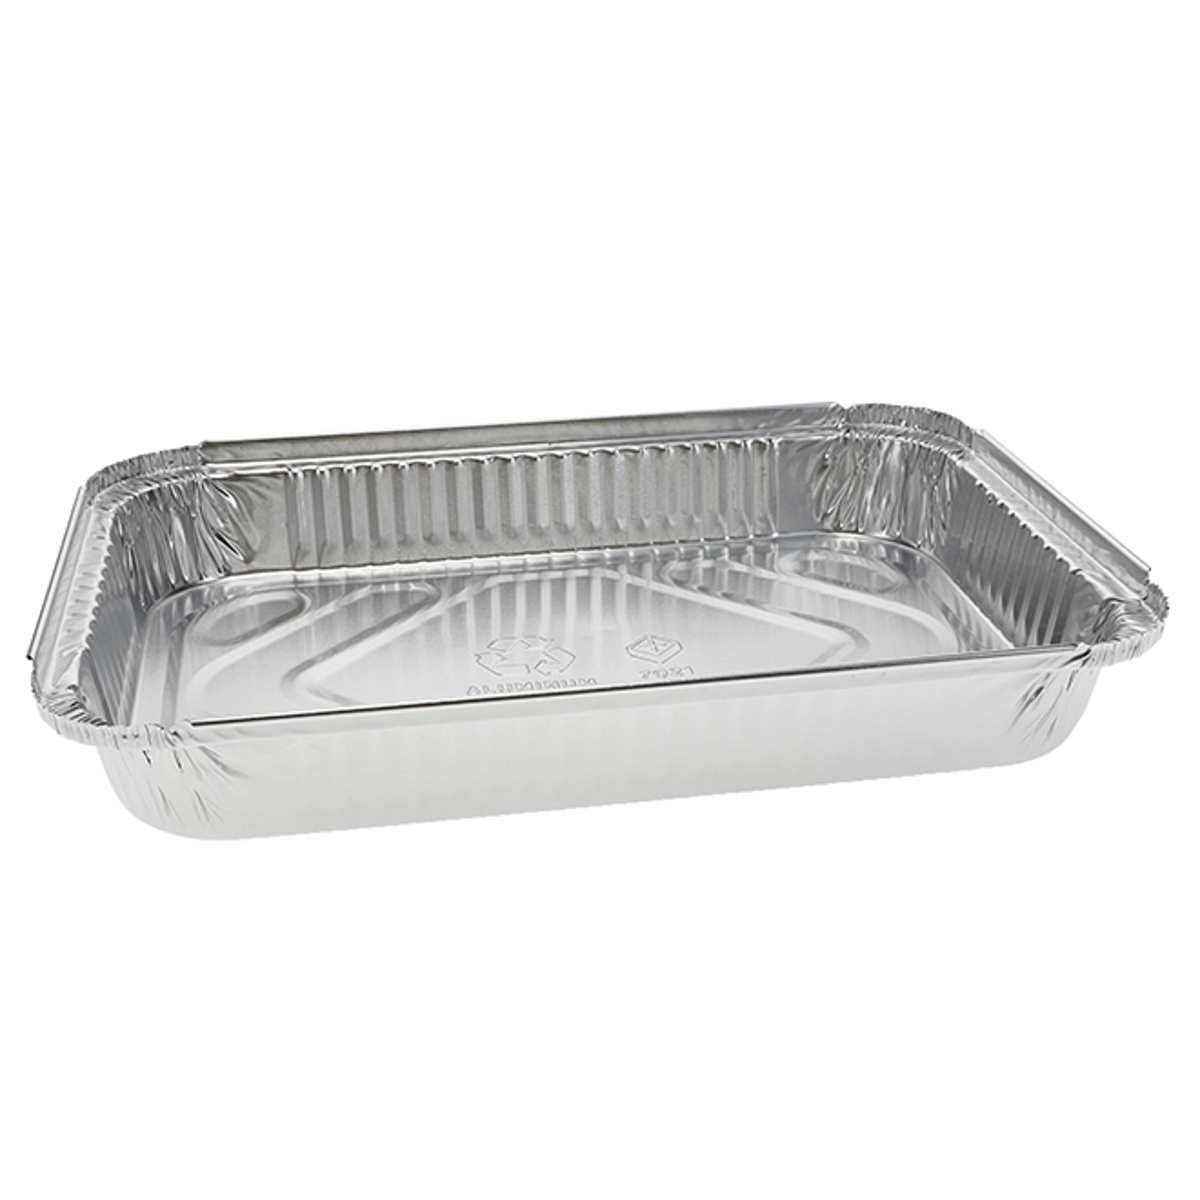 Aluminum Foil Tray Large 4 Pieces (45 PESOS EACH) 14x10x3 inches